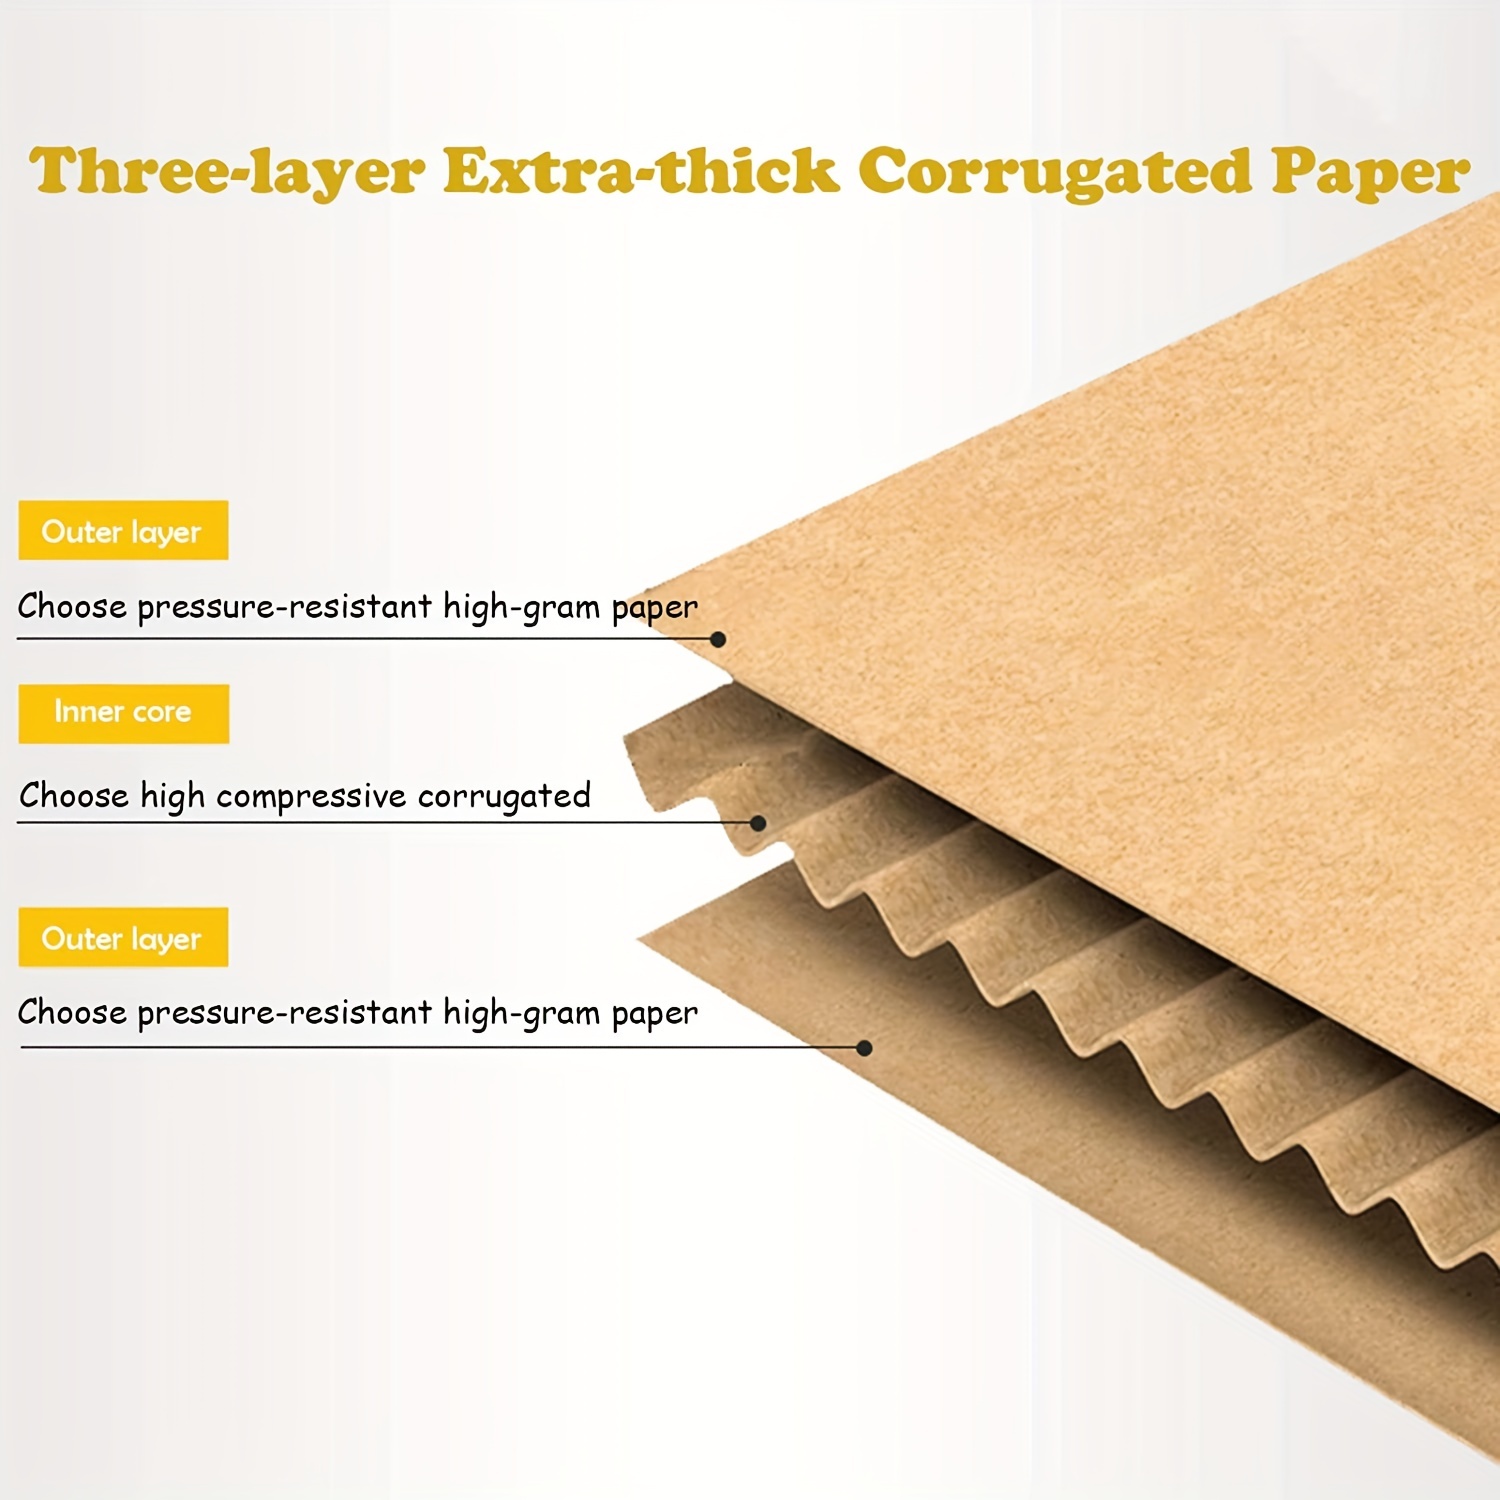  Edenseelake Cardboard Boxes 8 x 6 x 4 inches Small Shipping  Boxes, 25 Pack : Office Products